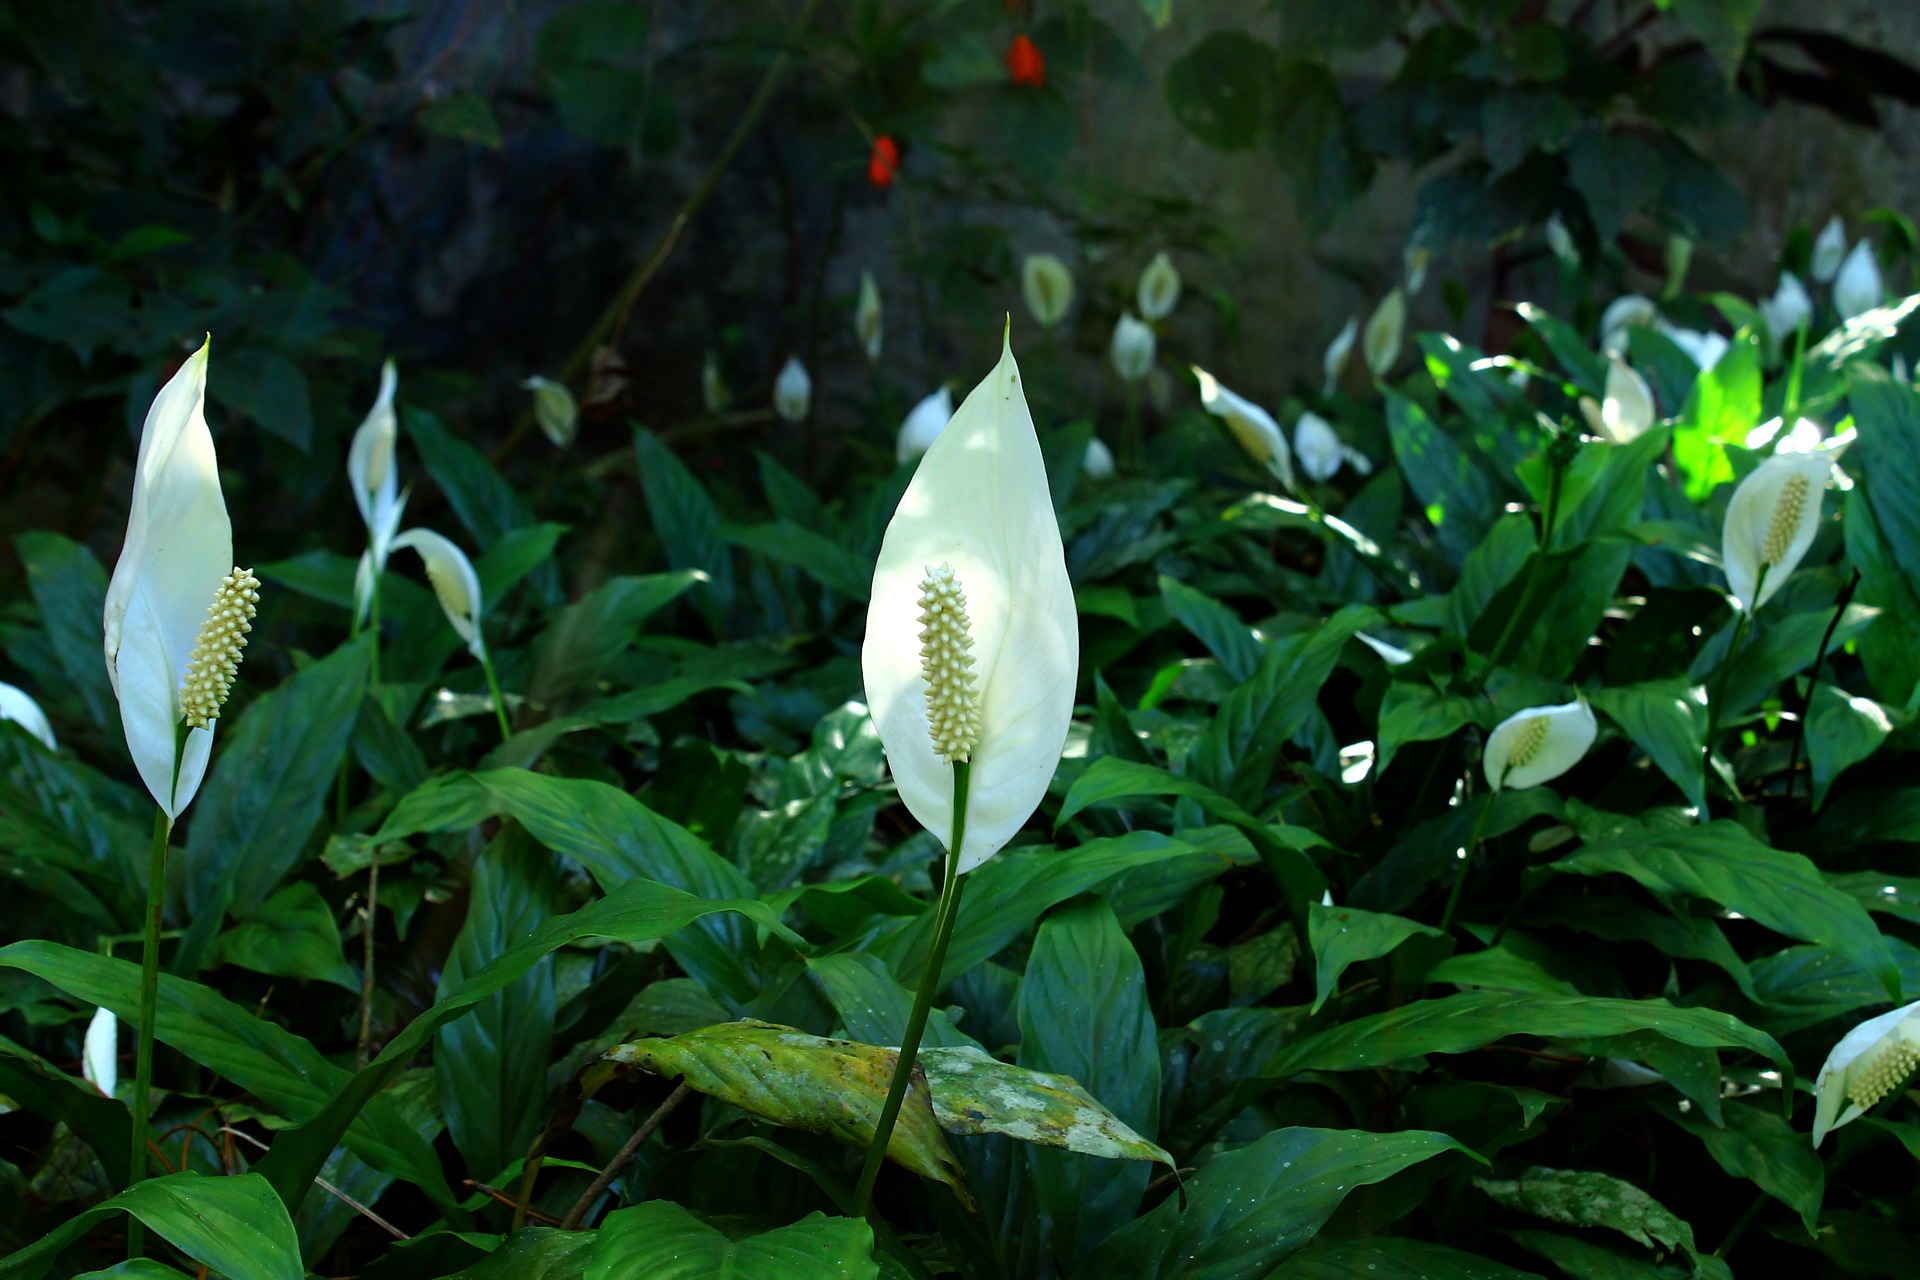 The peace lily